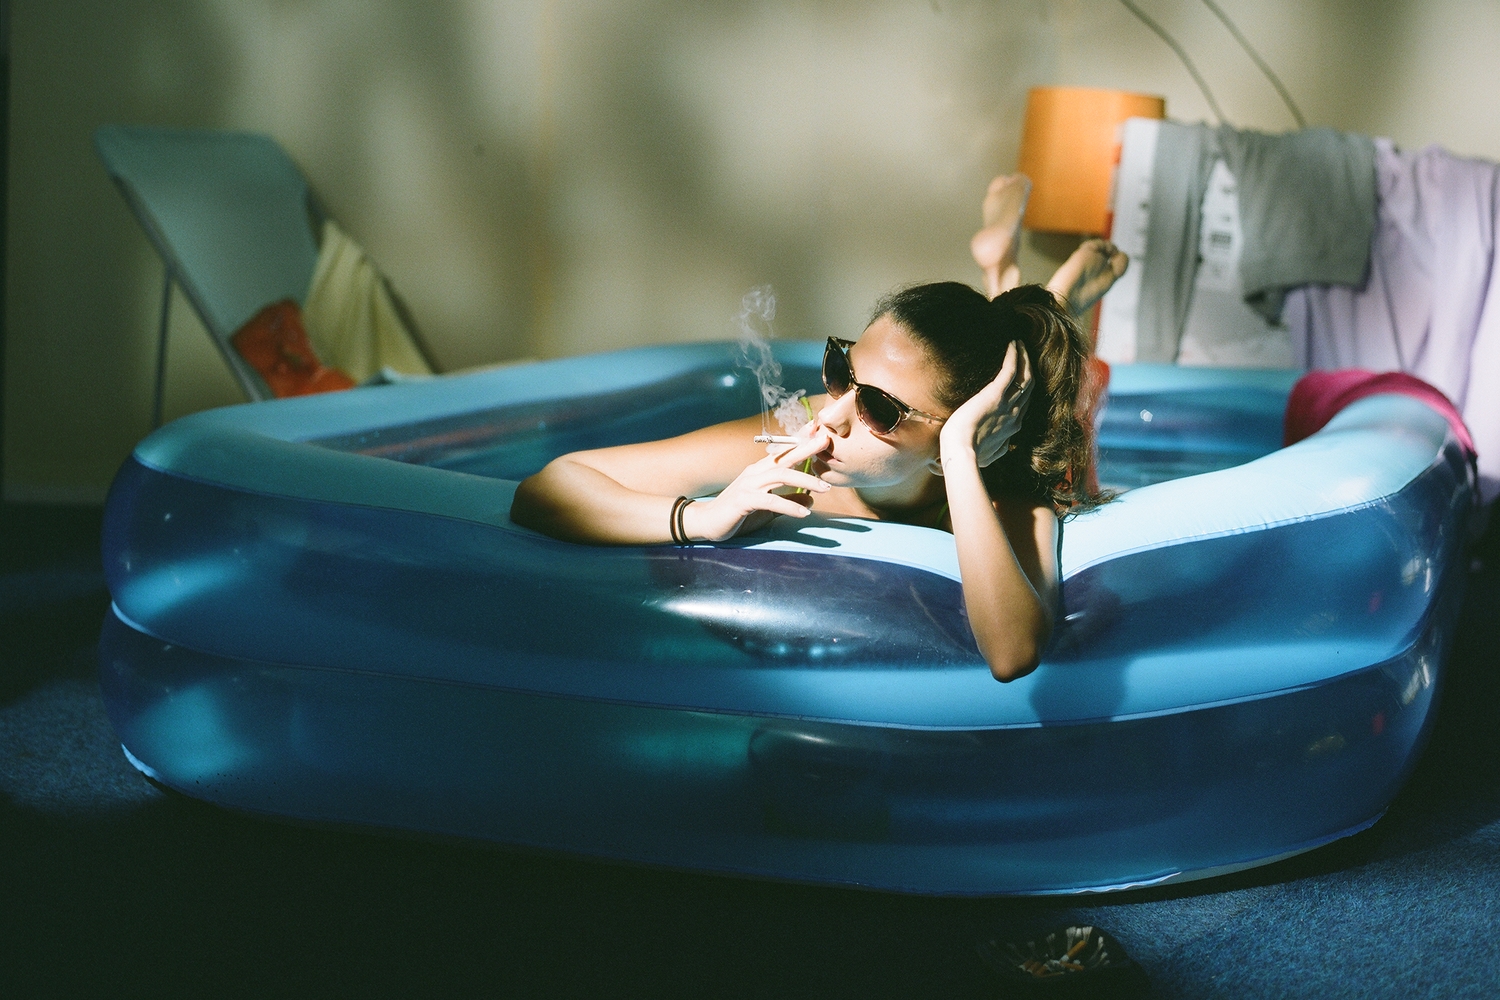 A girl smokes in an inflatable swiming pool